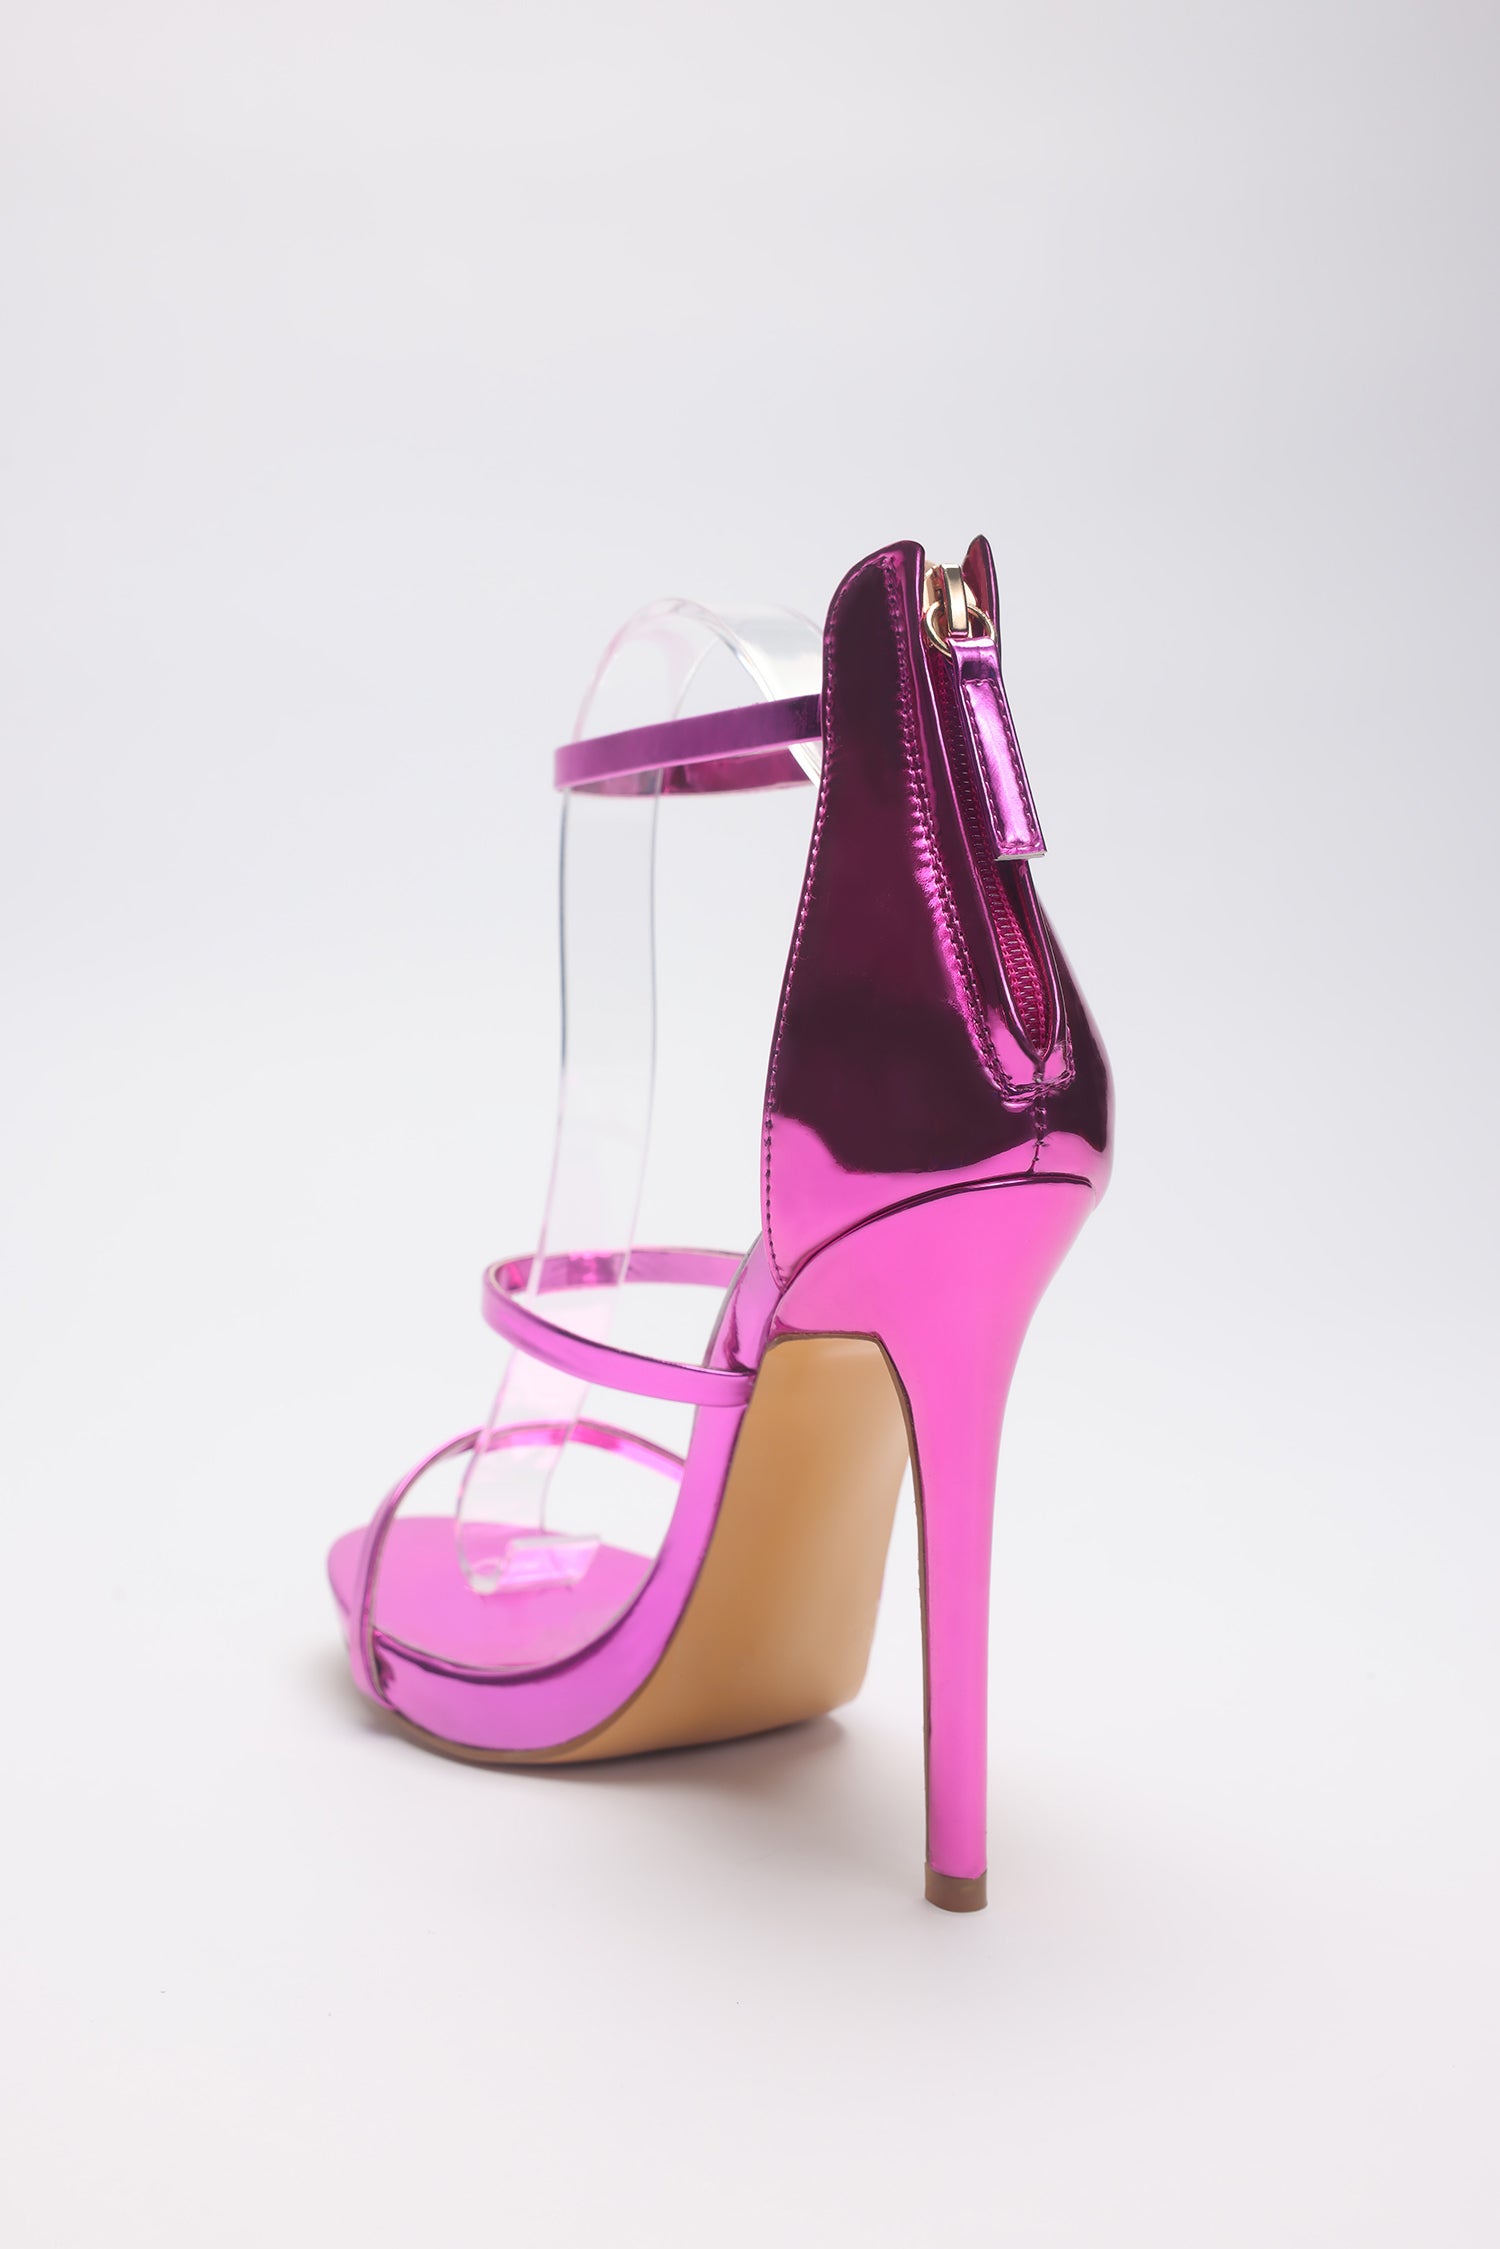 patent leather high heels